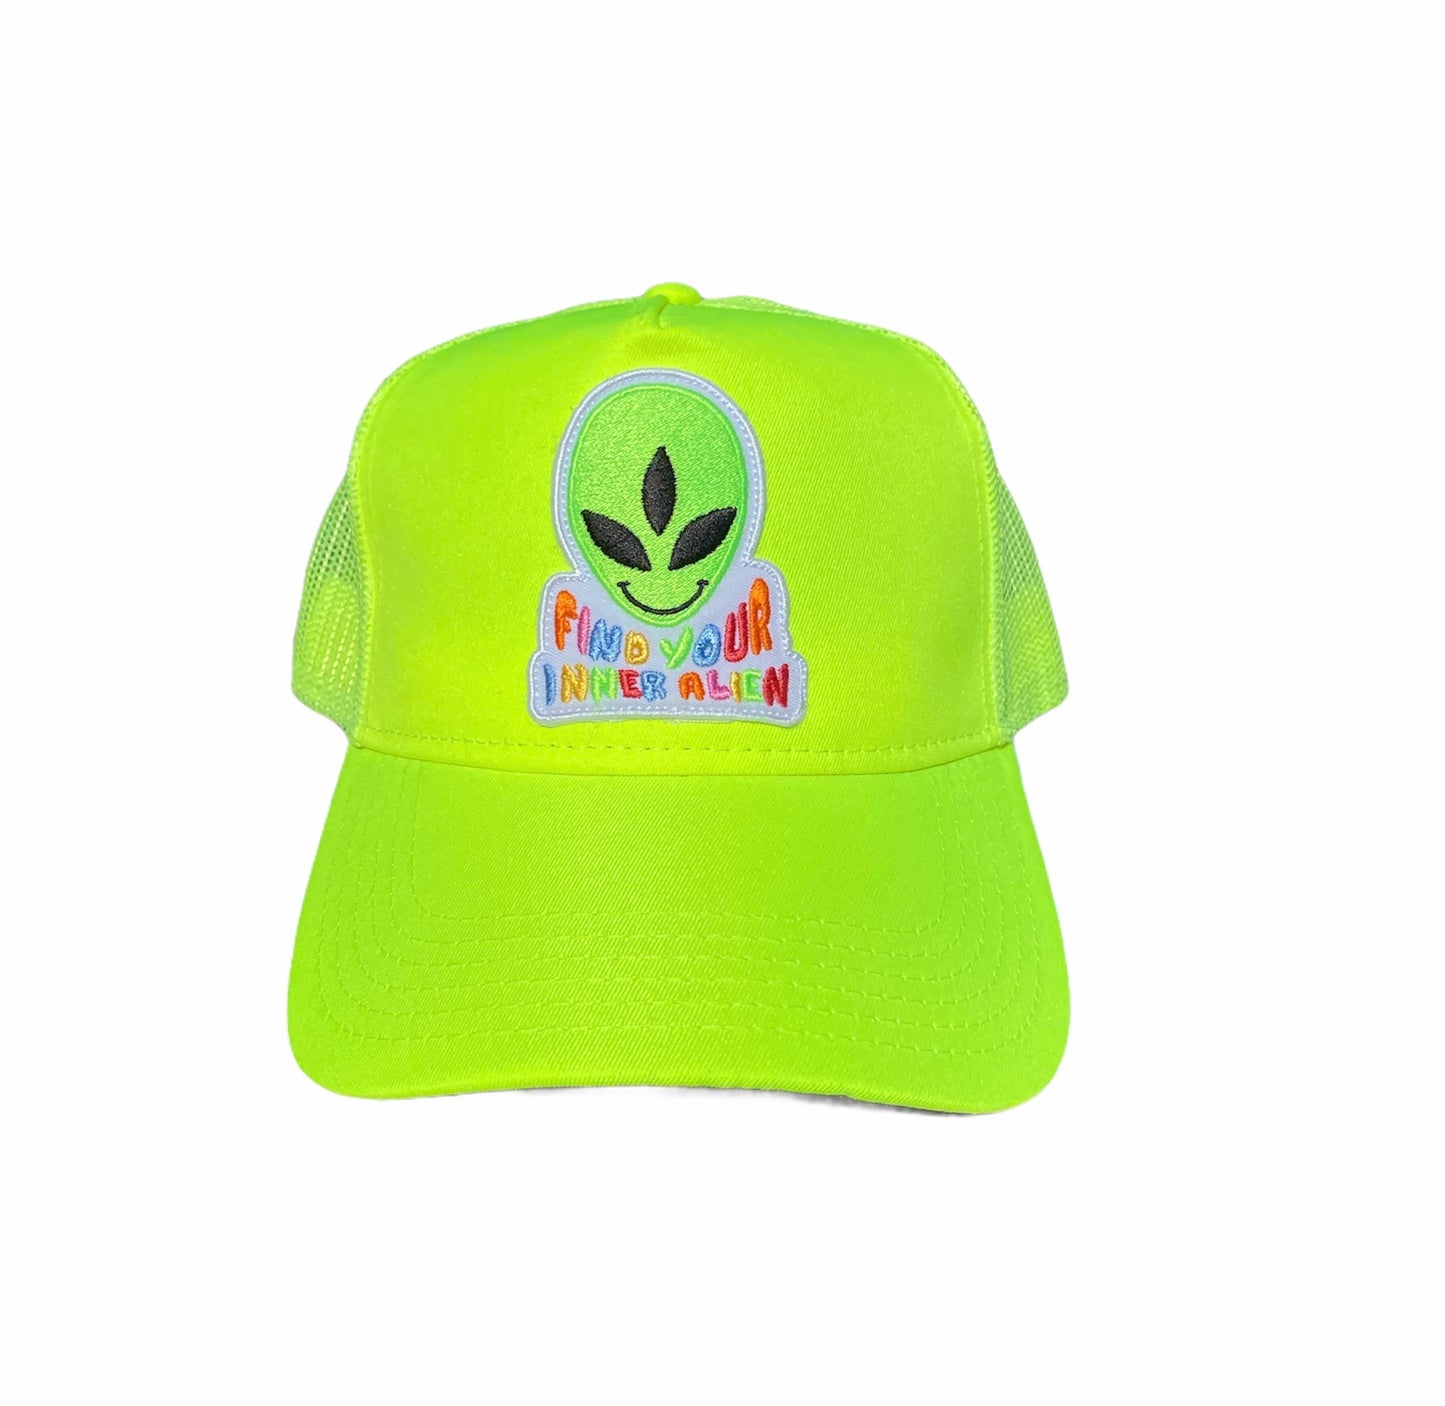 “FIND YOUR INNER ALIEN” Electric Lime Hard Front Trucker